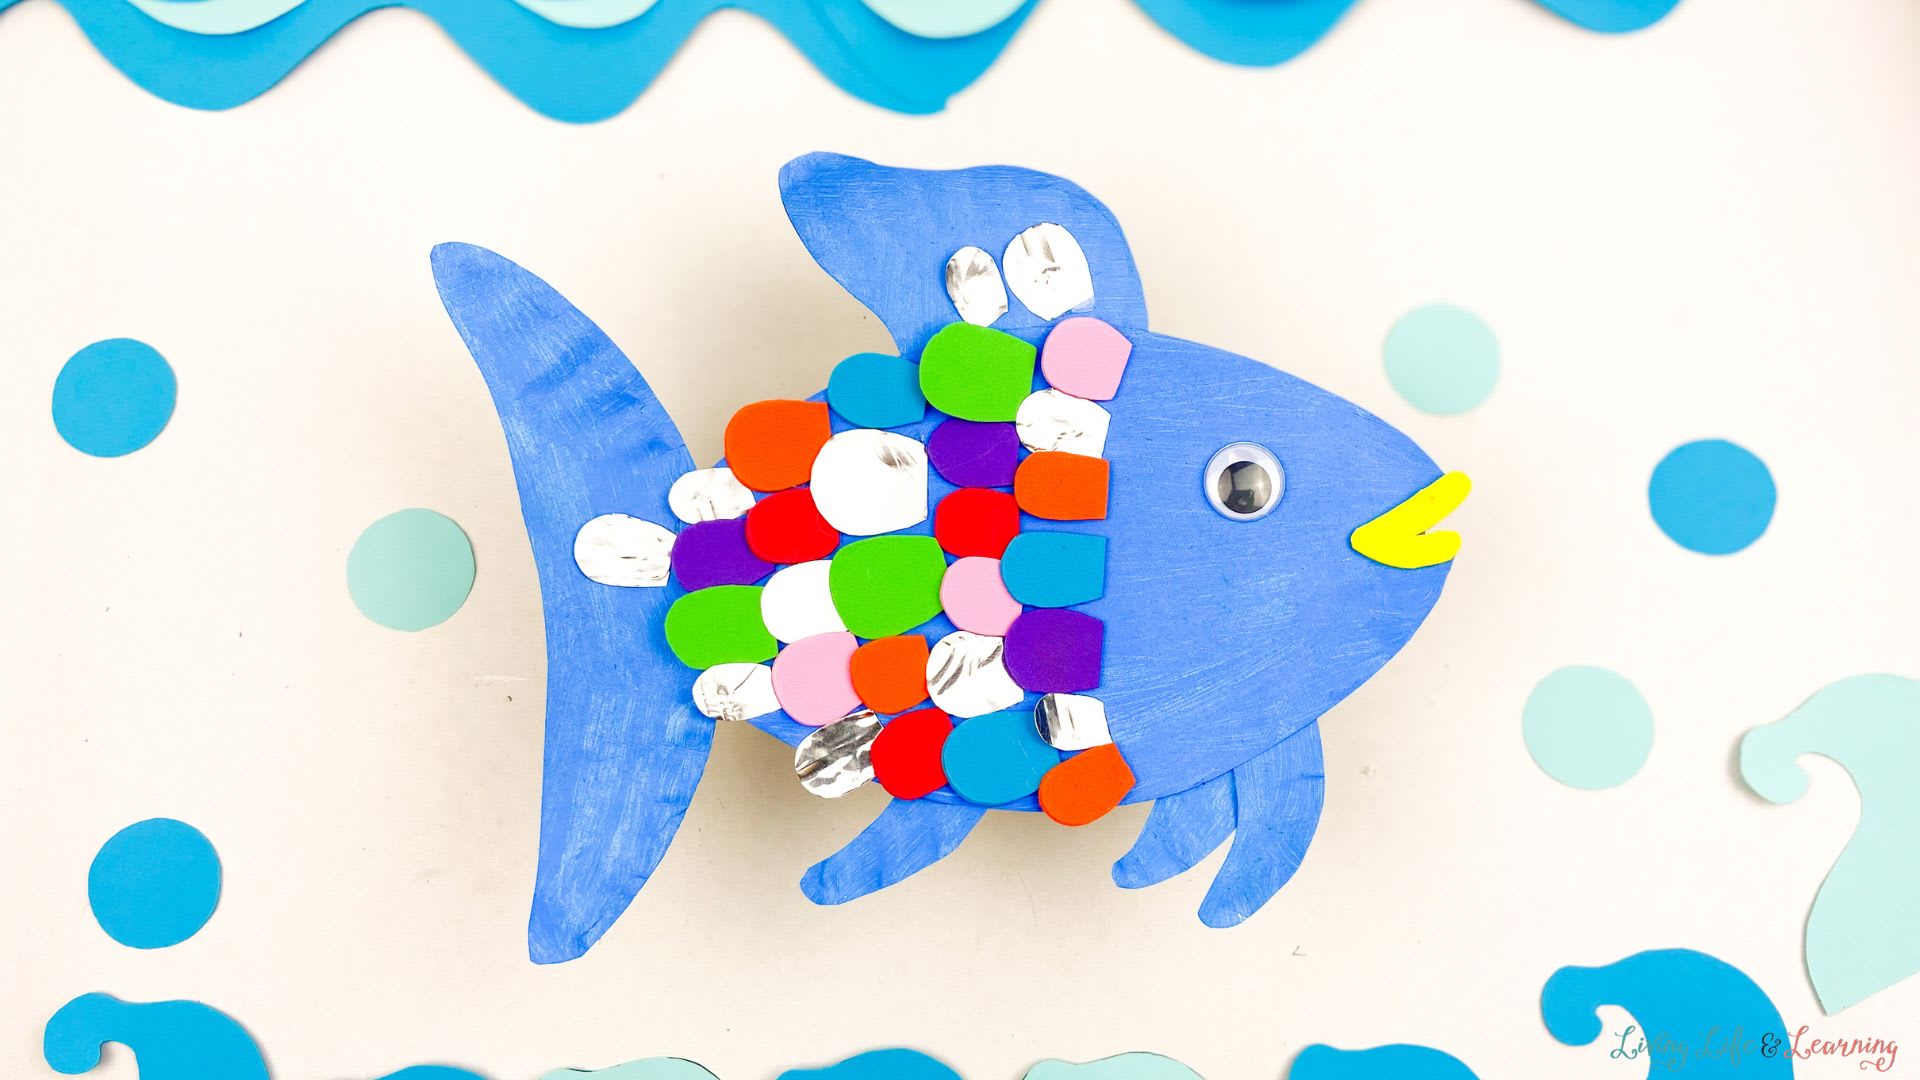 how to draw a fish by paper cutting, paper cutting art, rainbow art